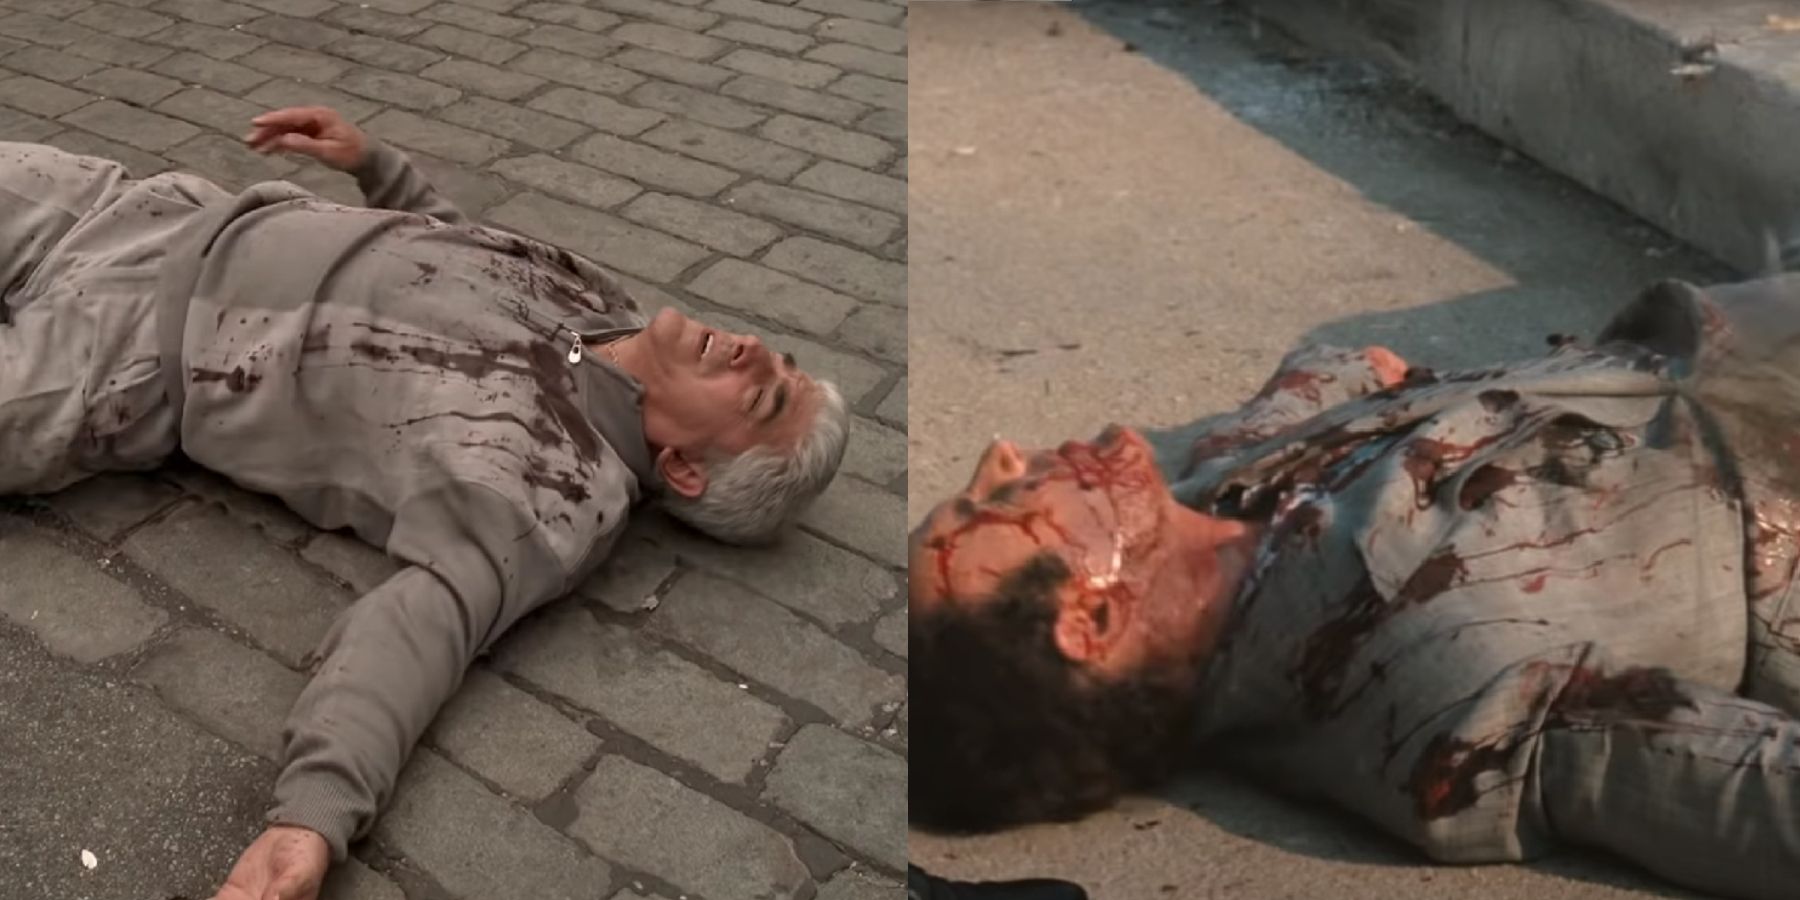 The deaths of Phil Leotardo and Sonny Corleone in The Sopranos and The Godfather